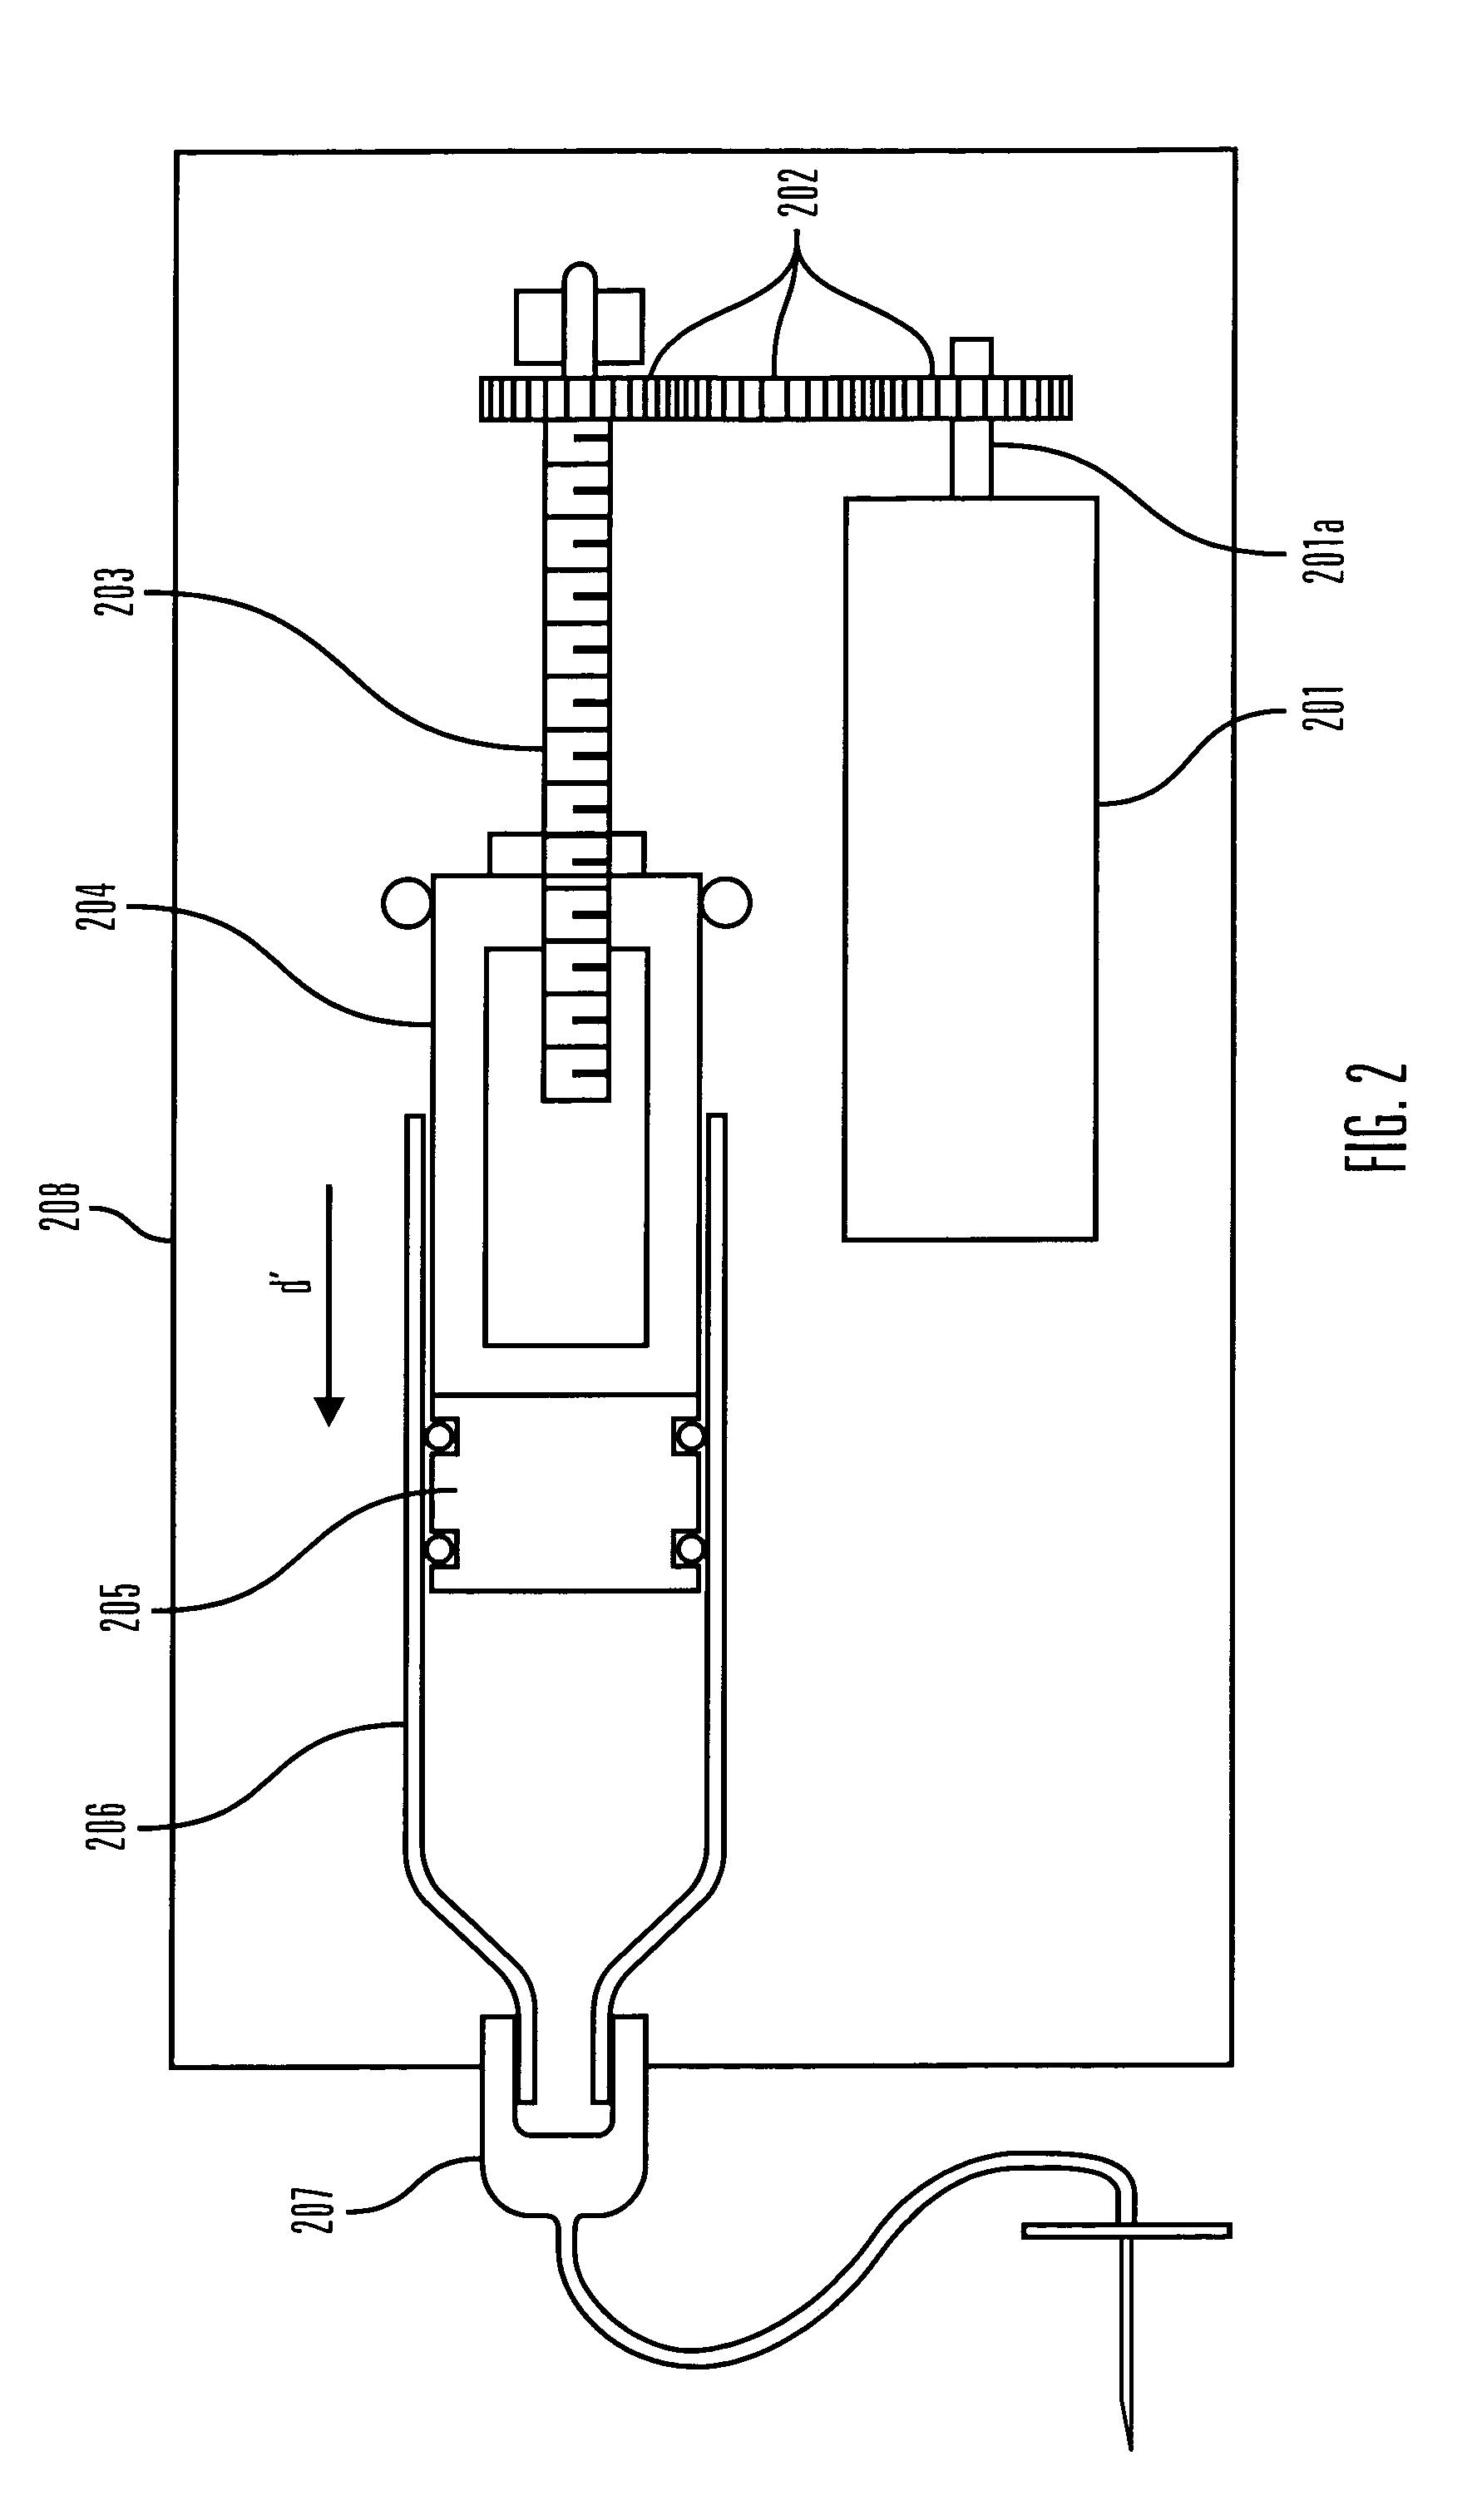 Lead screw driven reservoir with integral plunger nut and method of using the same